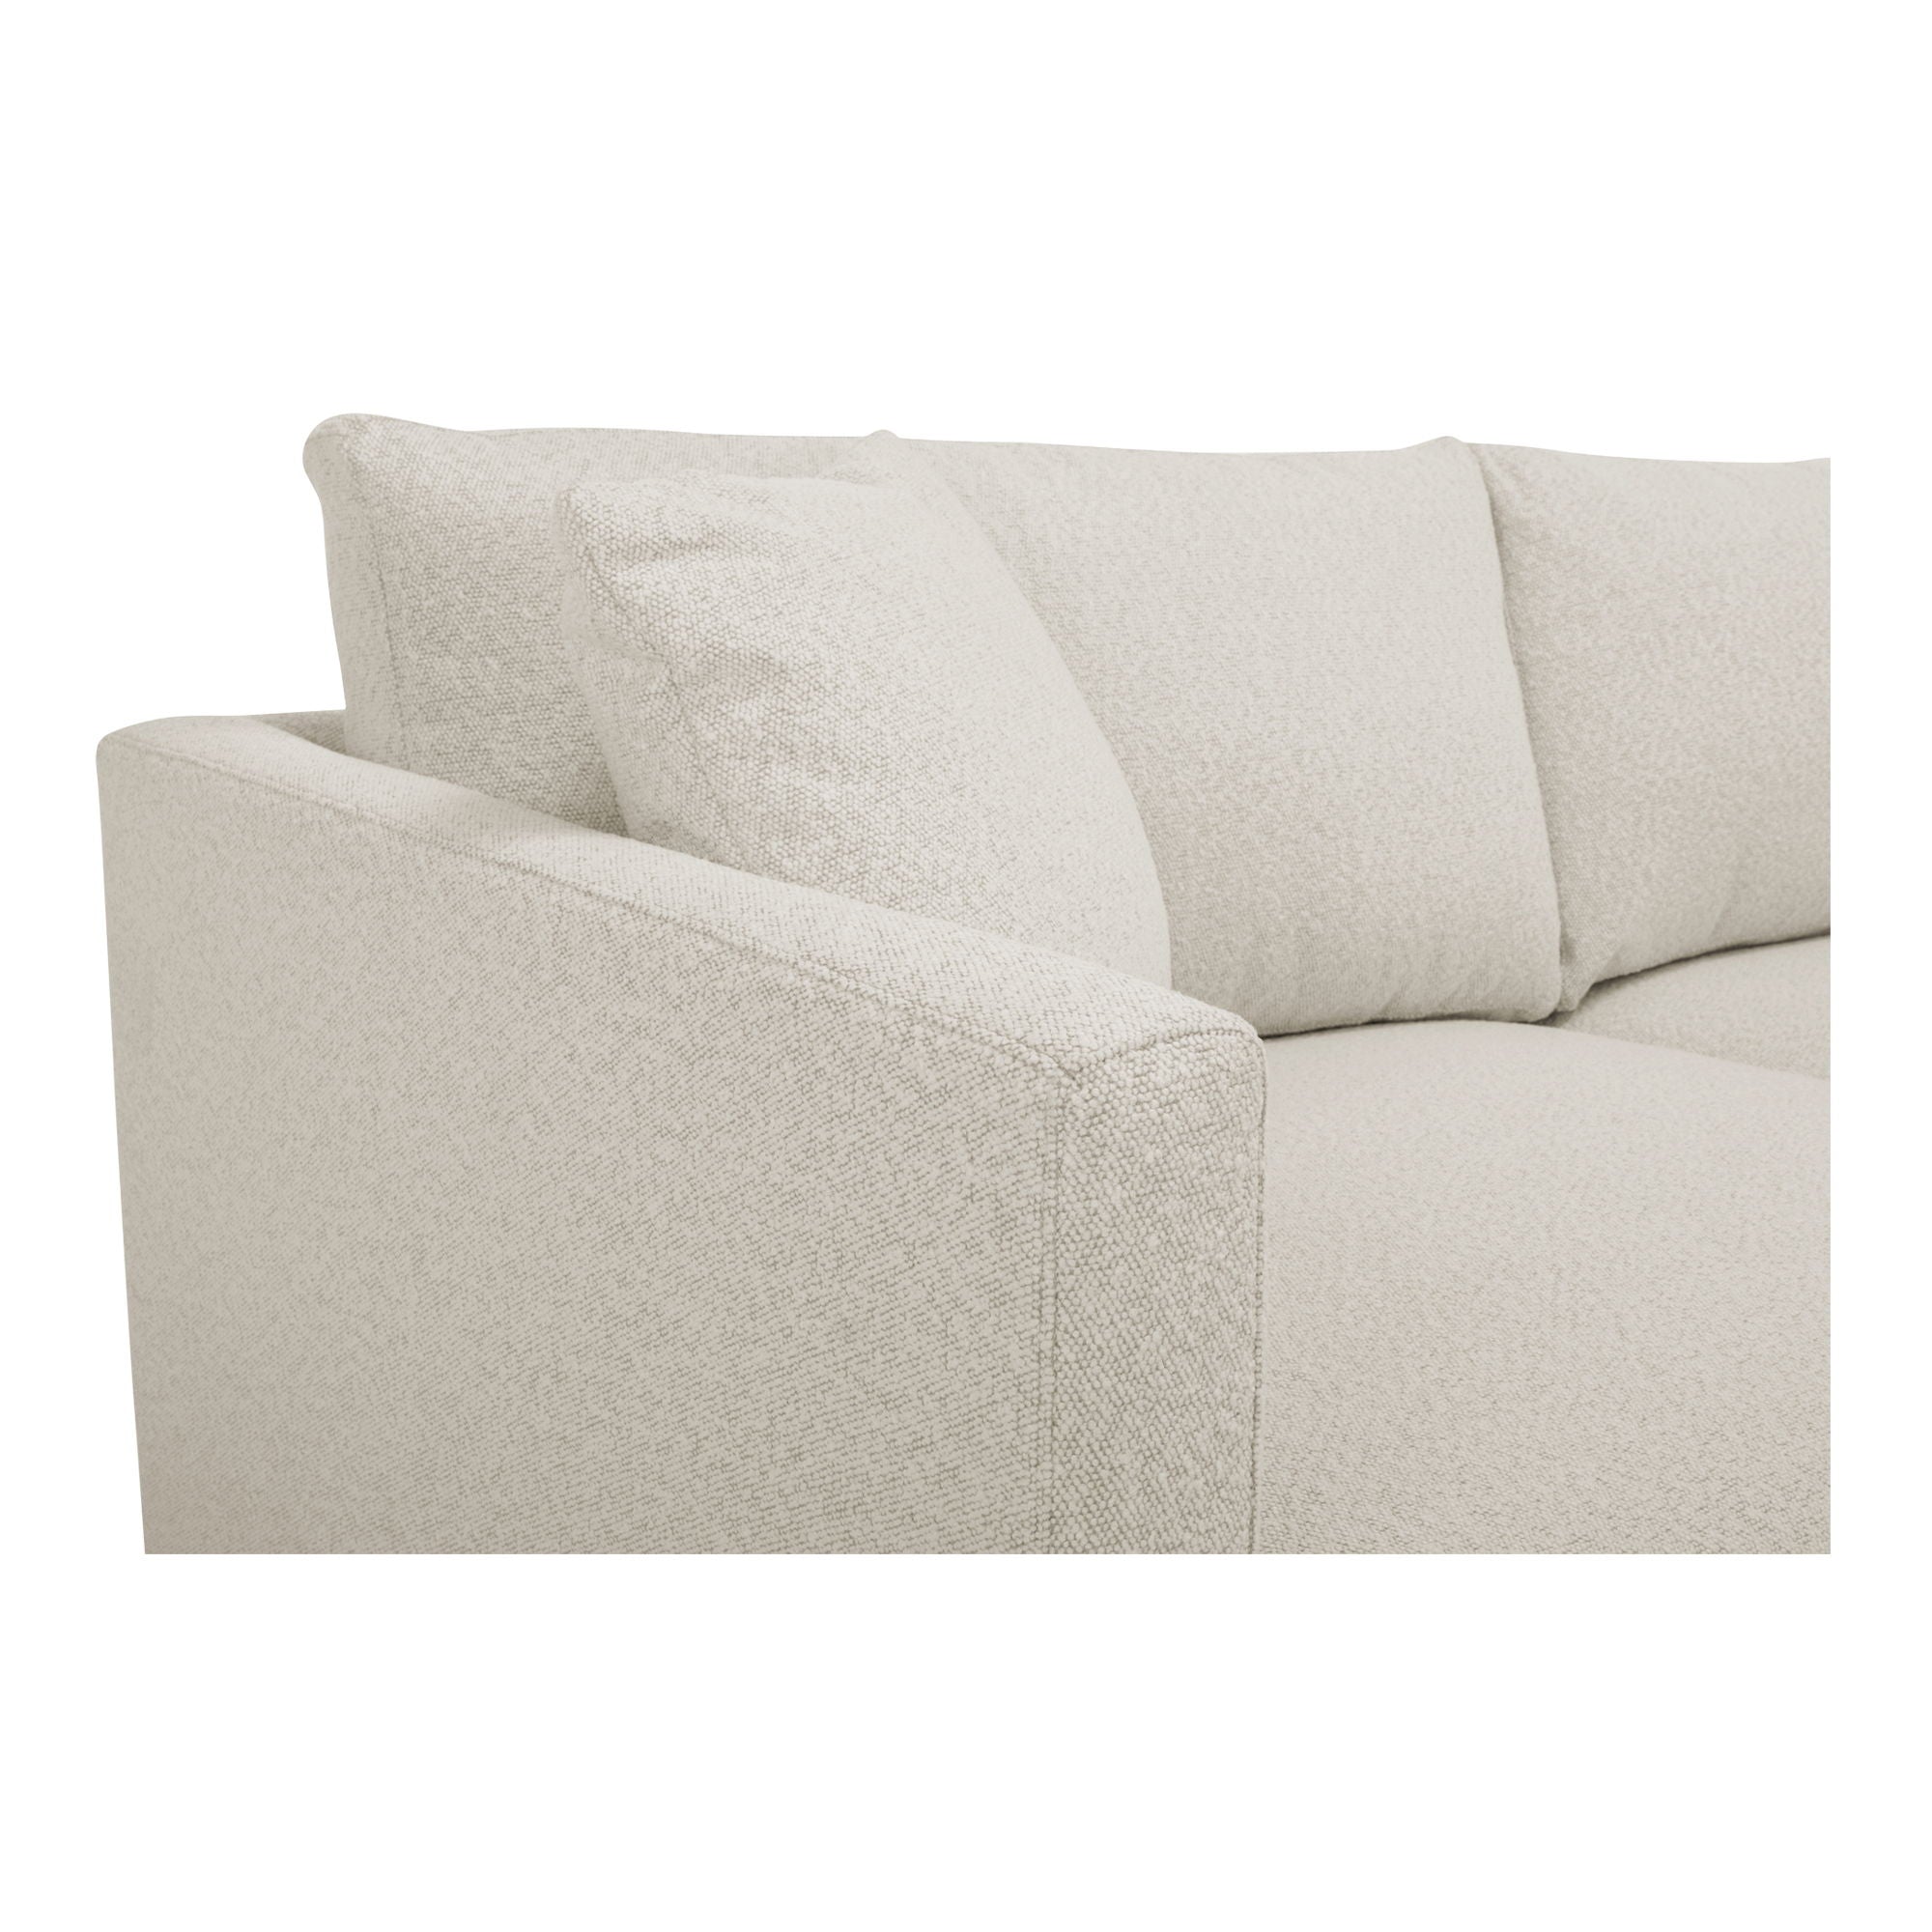 Bryn - Sectional Right - Oyster-Stationary Sectionals-American Furniture Outlet